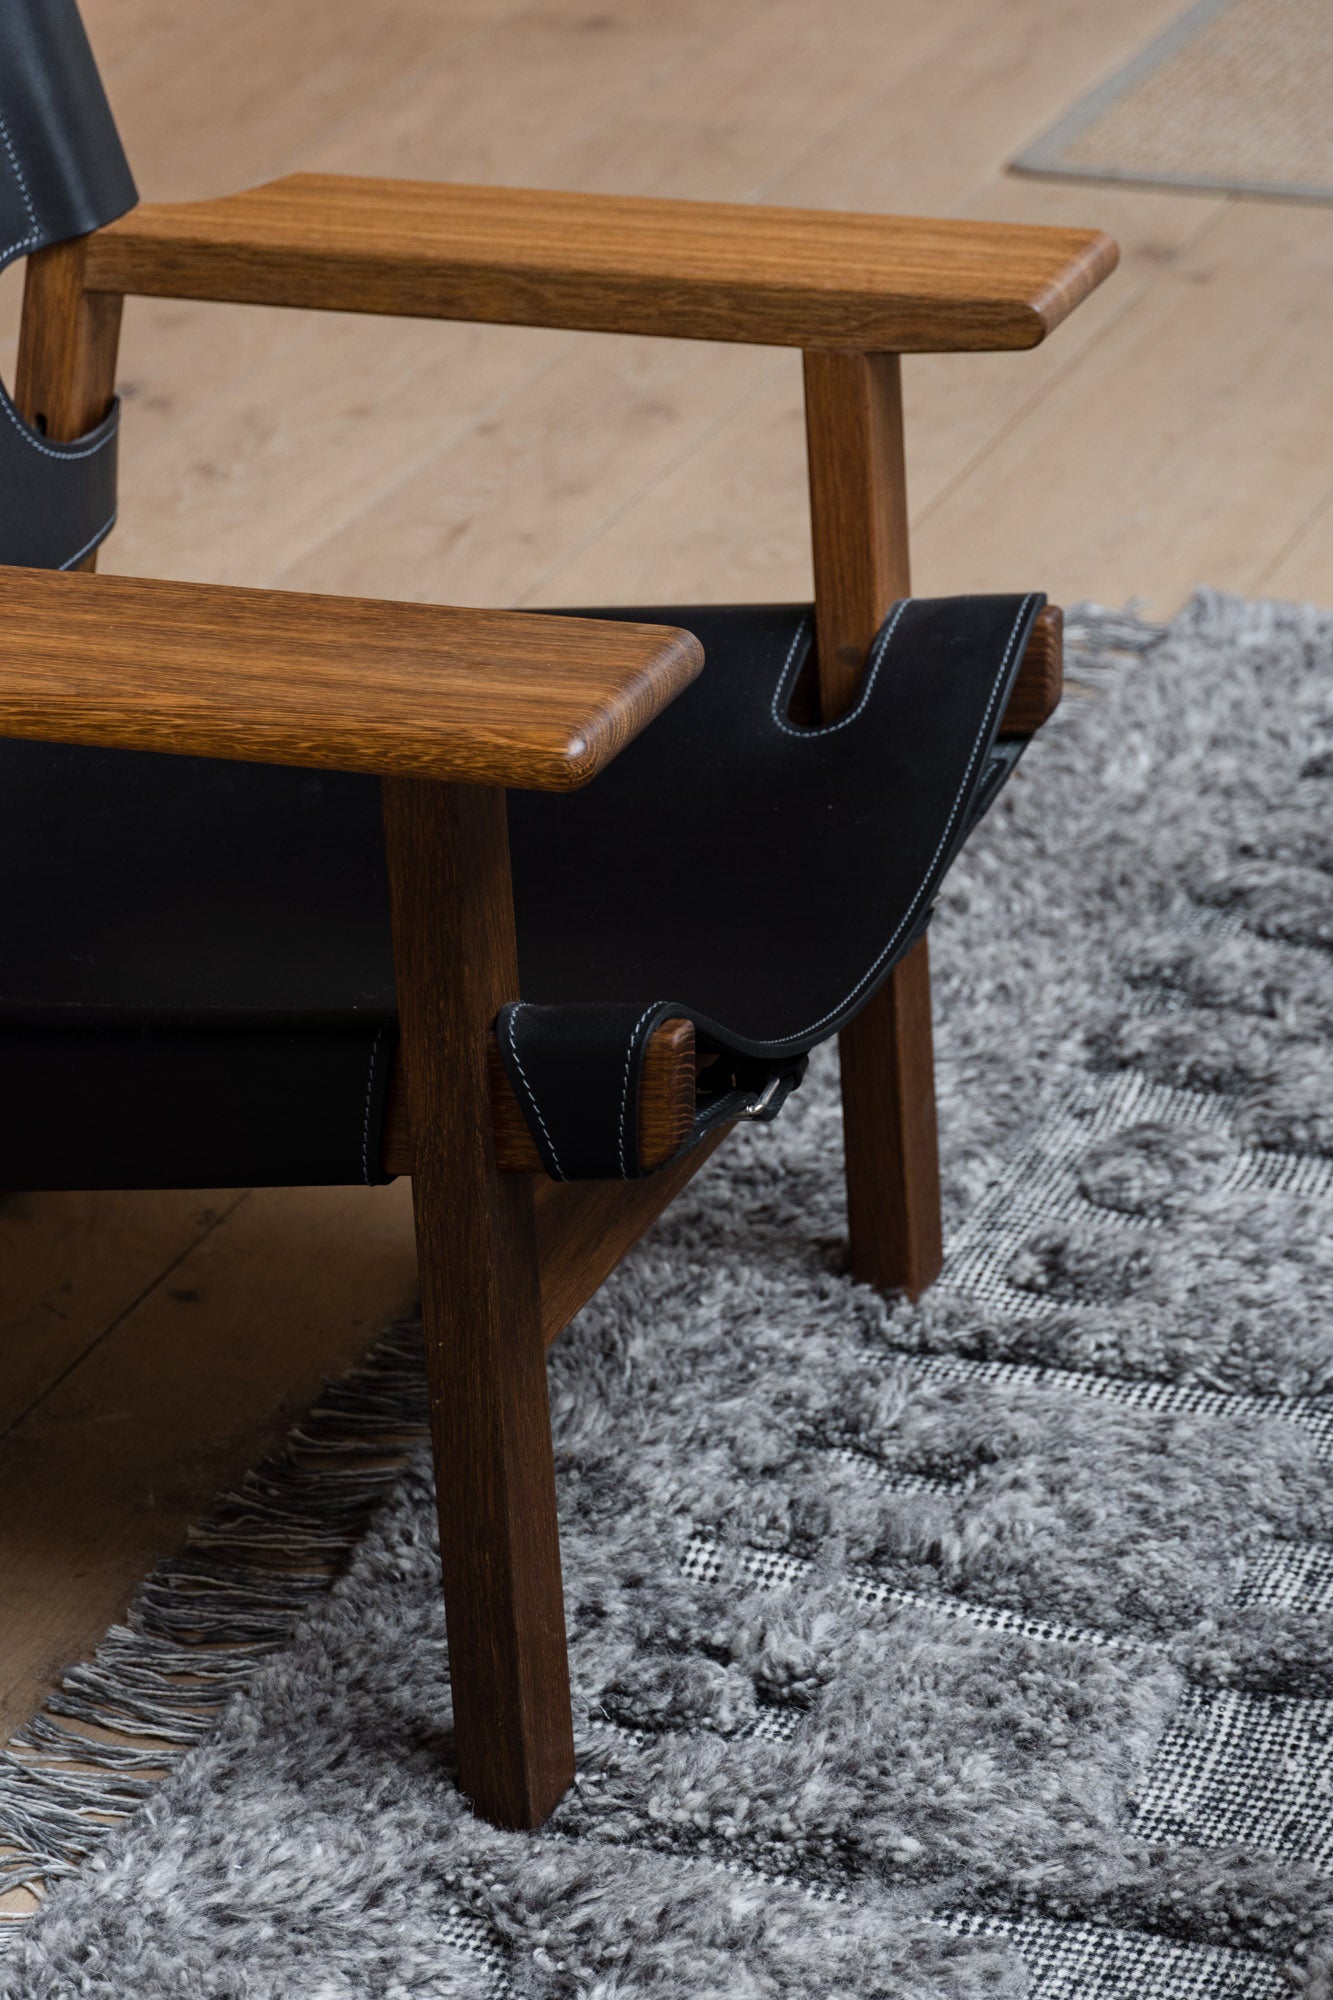 A wooden chair set on the PCB Rug by Zakaria Rugs.